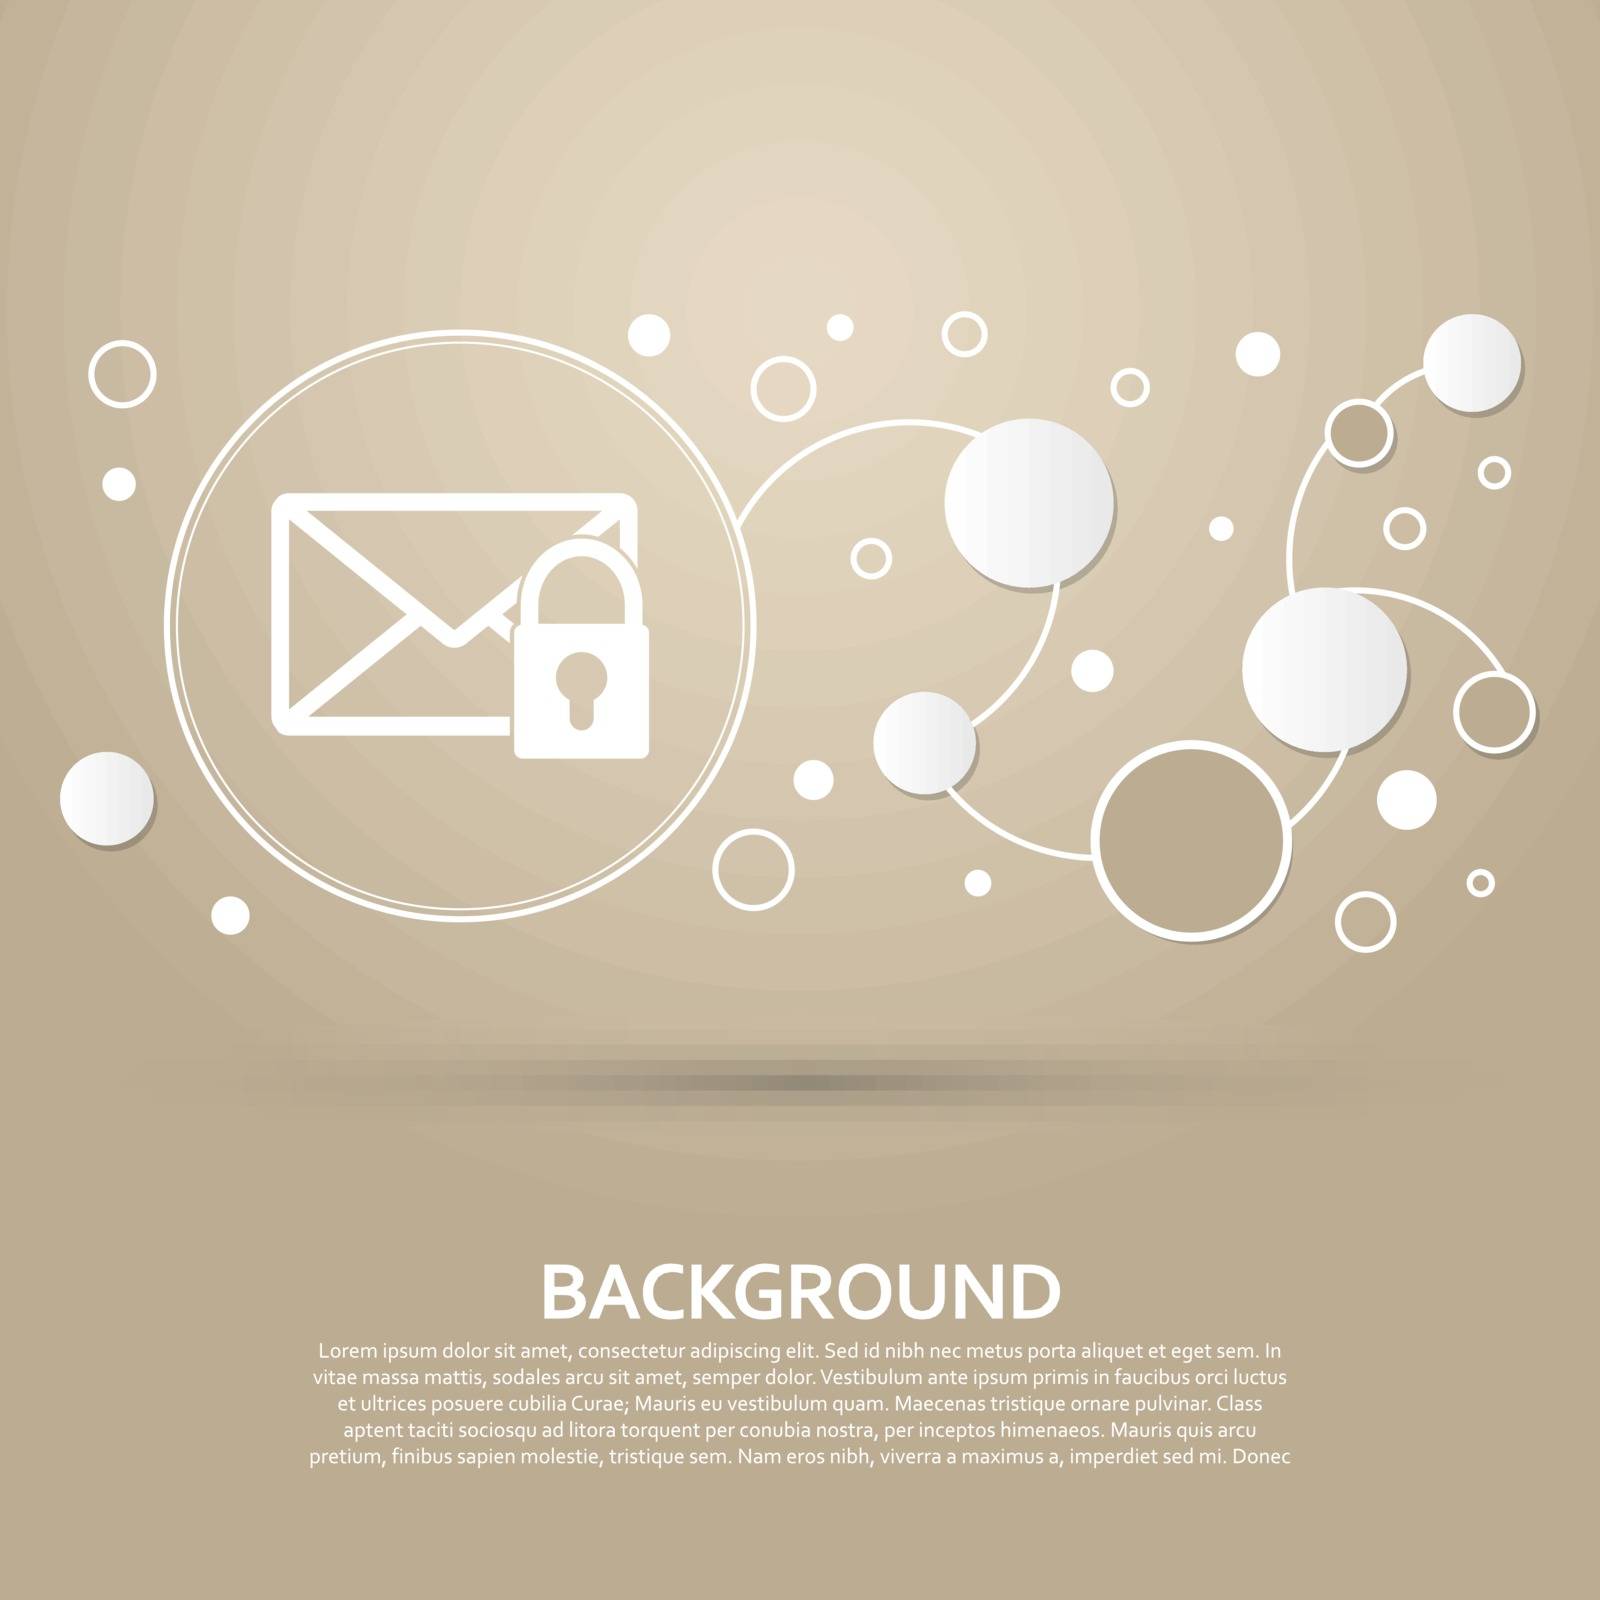 Secret mail icon on a brown background with elegant style and modern design infographic. Vector illustration